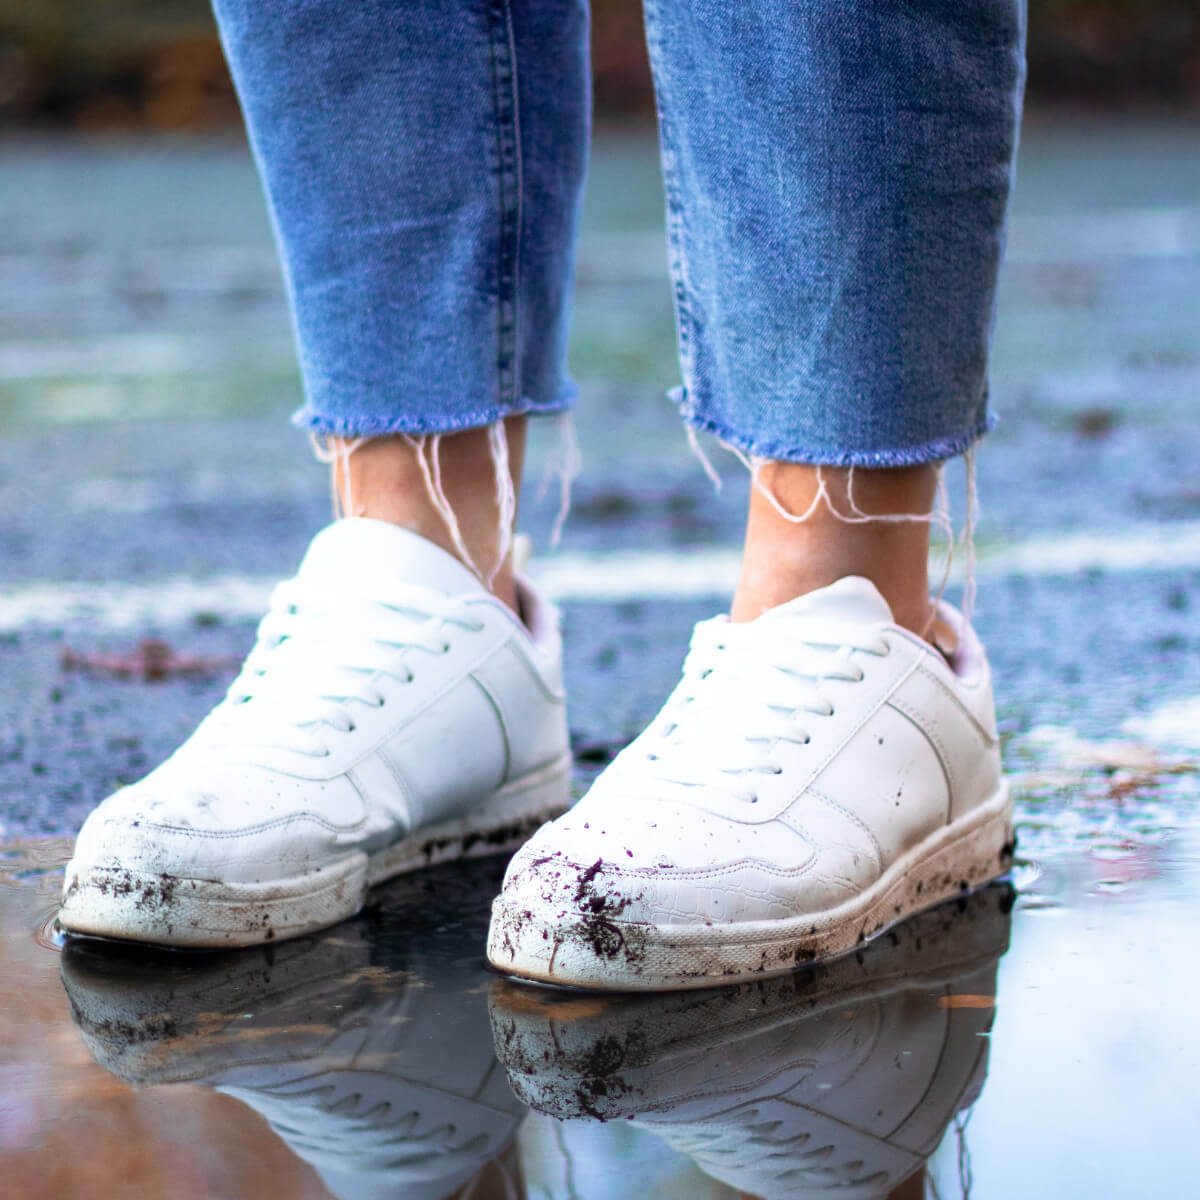 5 astuces pour nettoyer vos baskets blanches